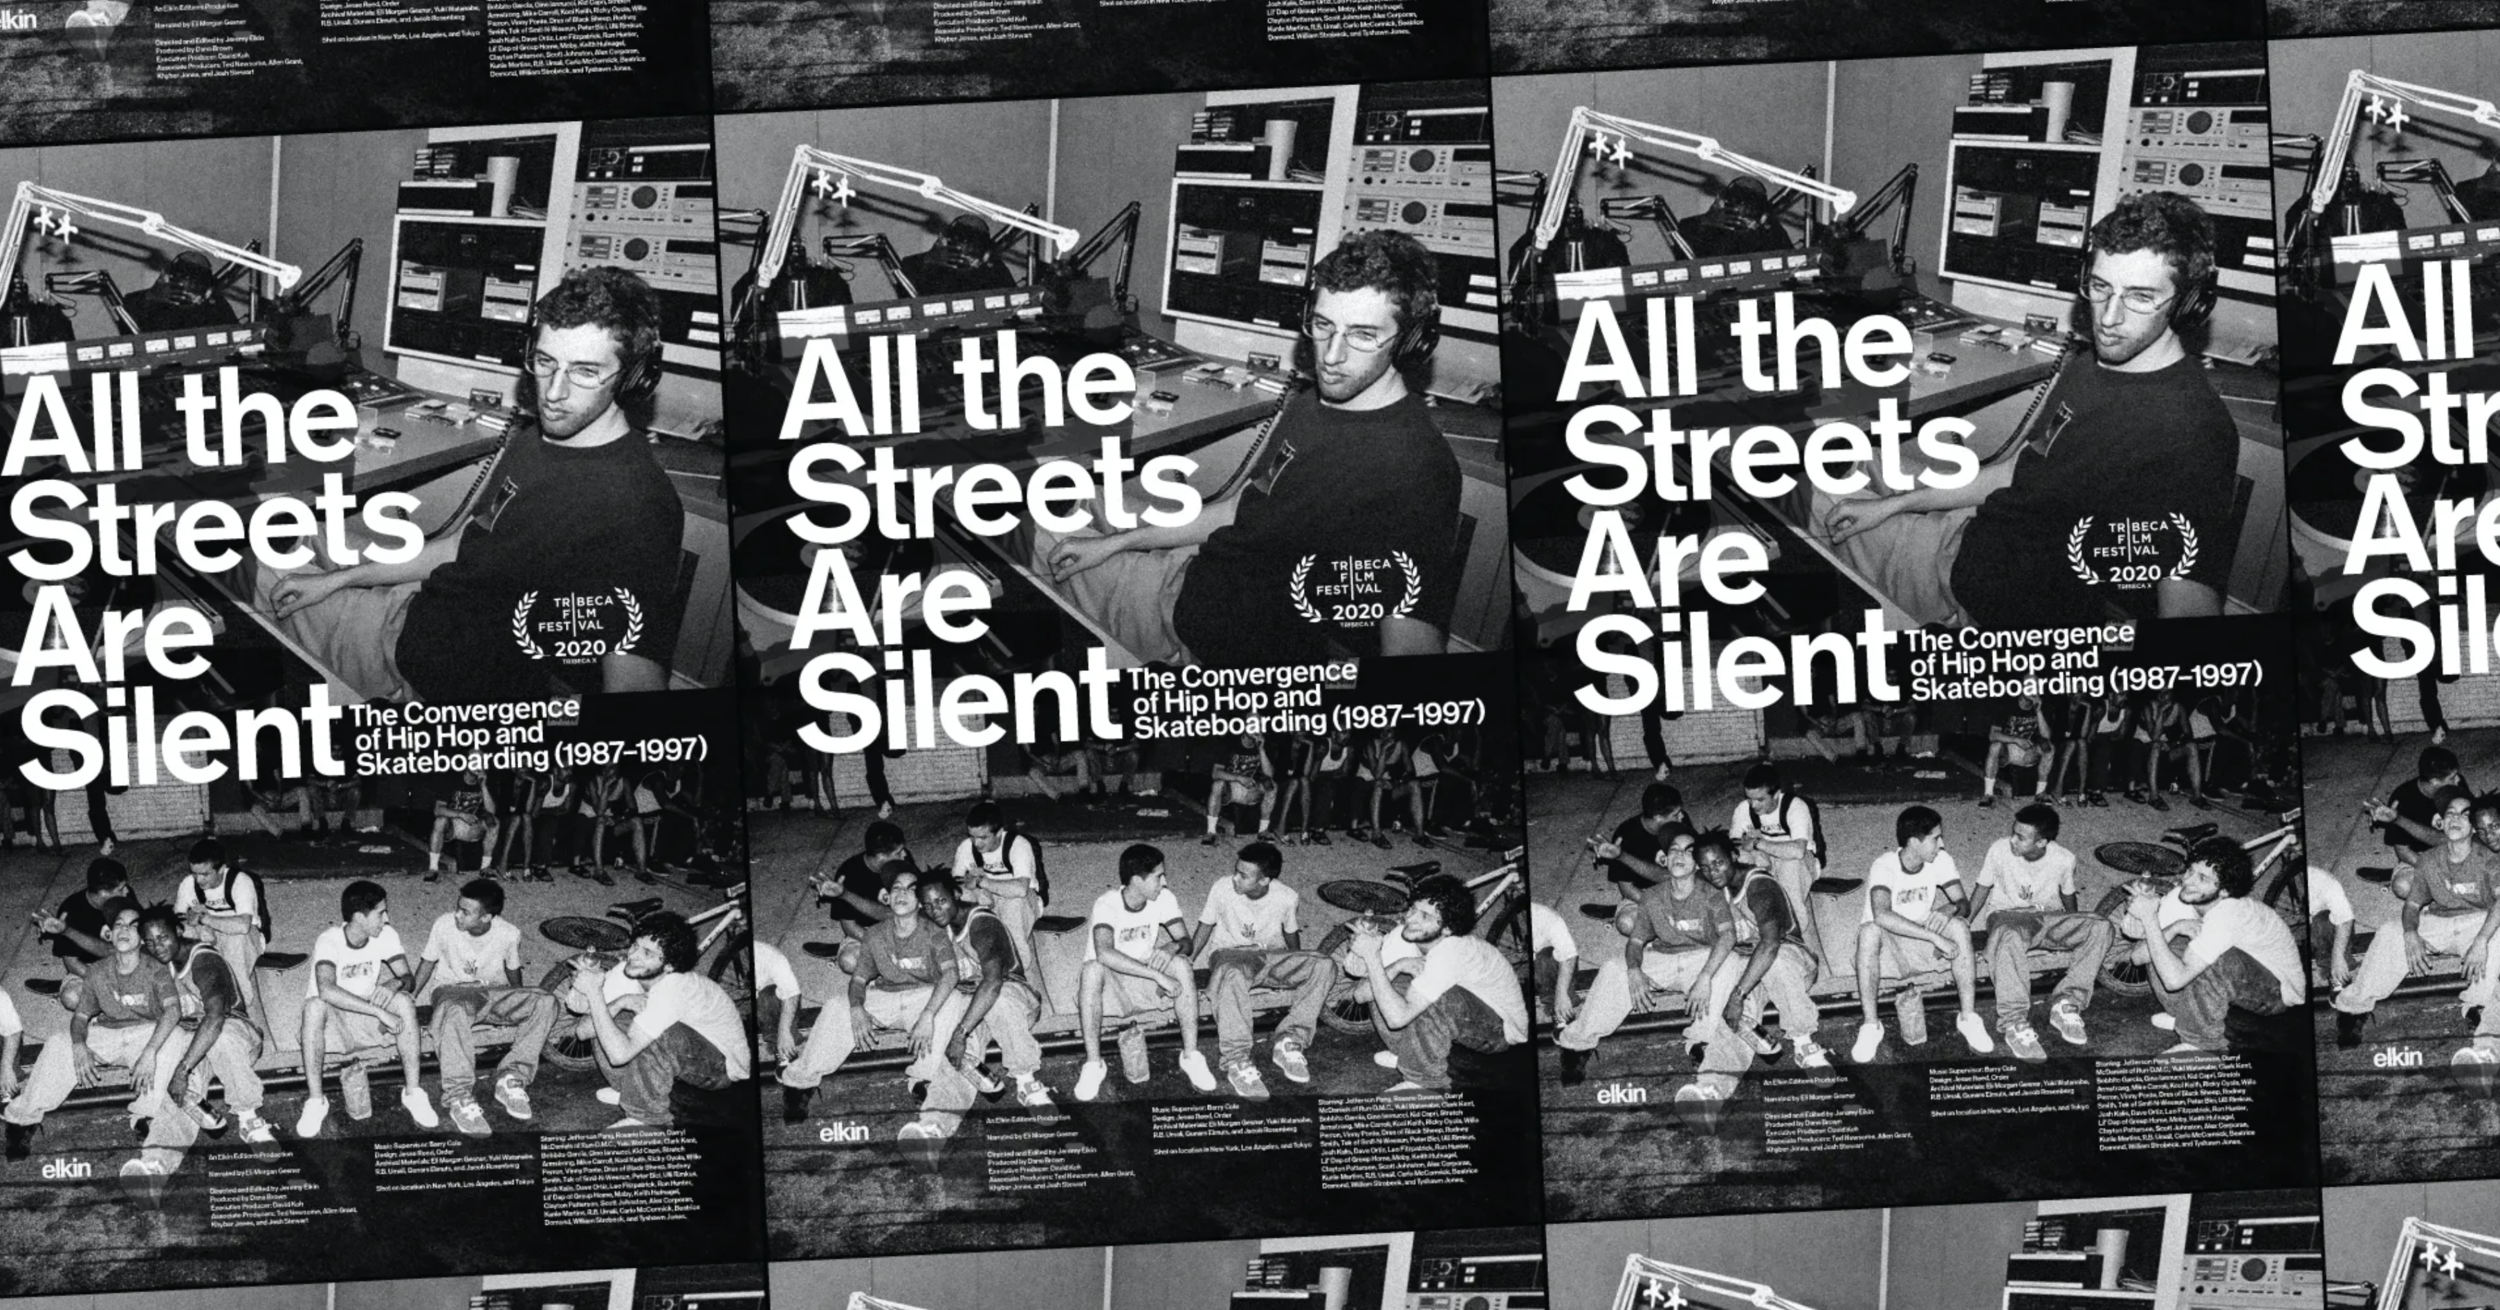 [fade]ALL THE STREETS ARE SILENT&lt;strong&gt;ELKIN EDITIONS&lt;/strong&gt;[/fade]